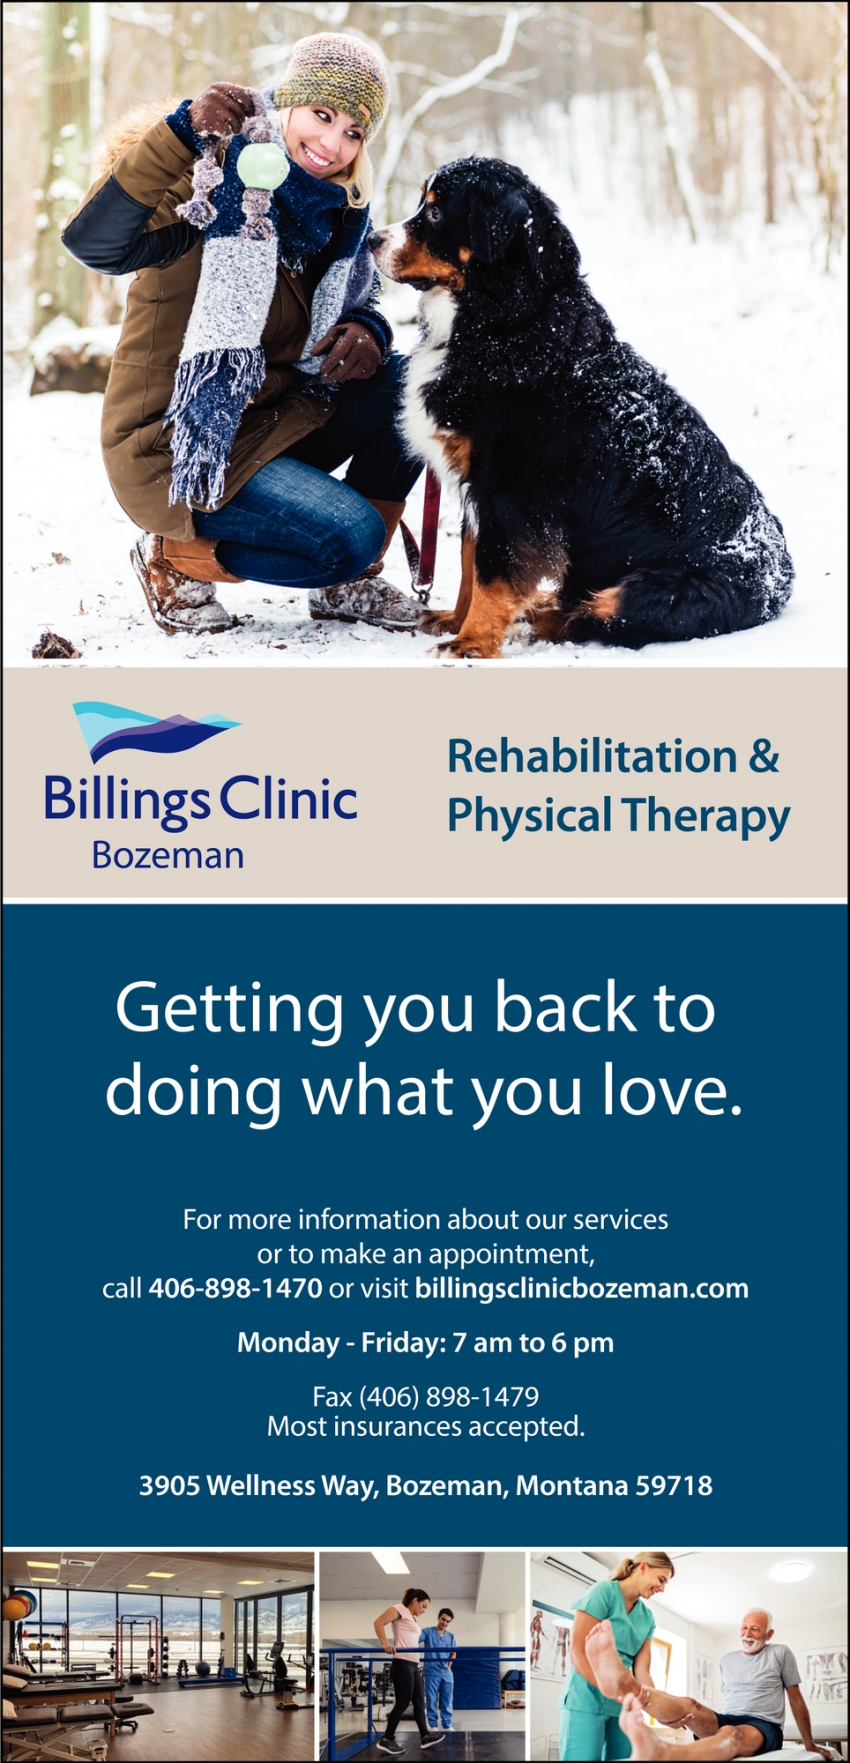 Rehabilitation & Physical Therapy